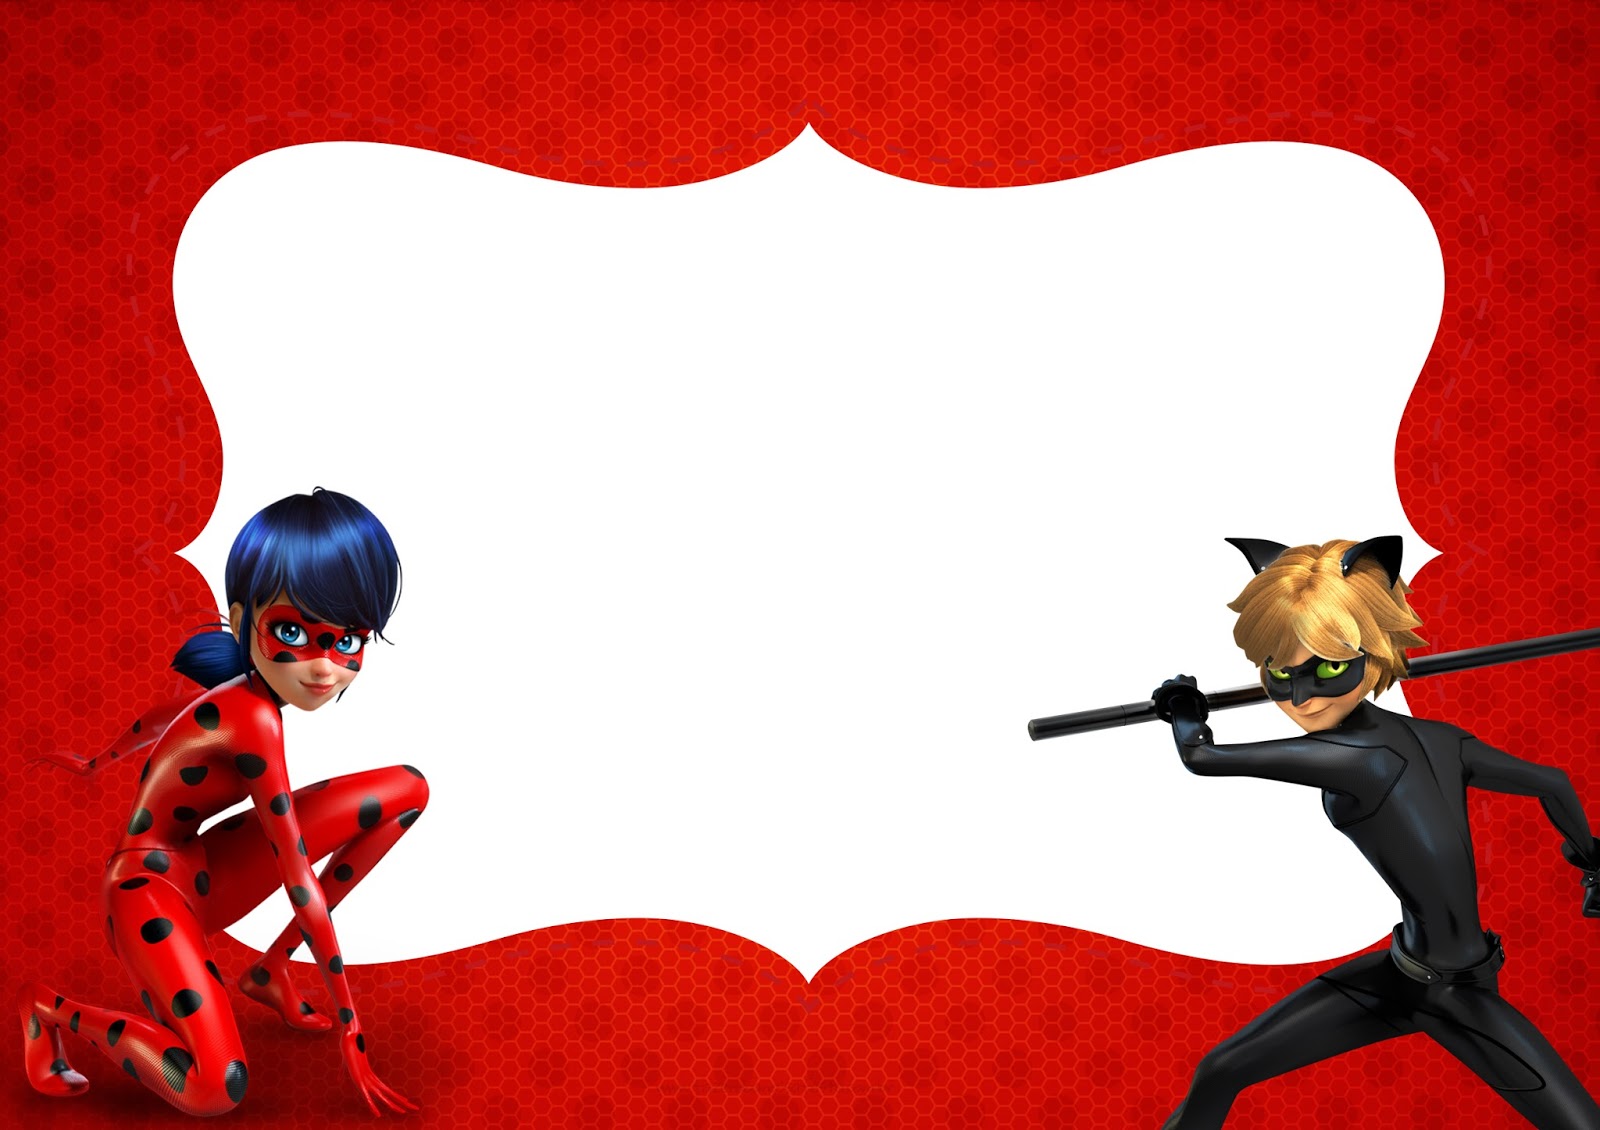 Miraculous Ladybug Free Printable Invitations. Oh My Fiesta! in english